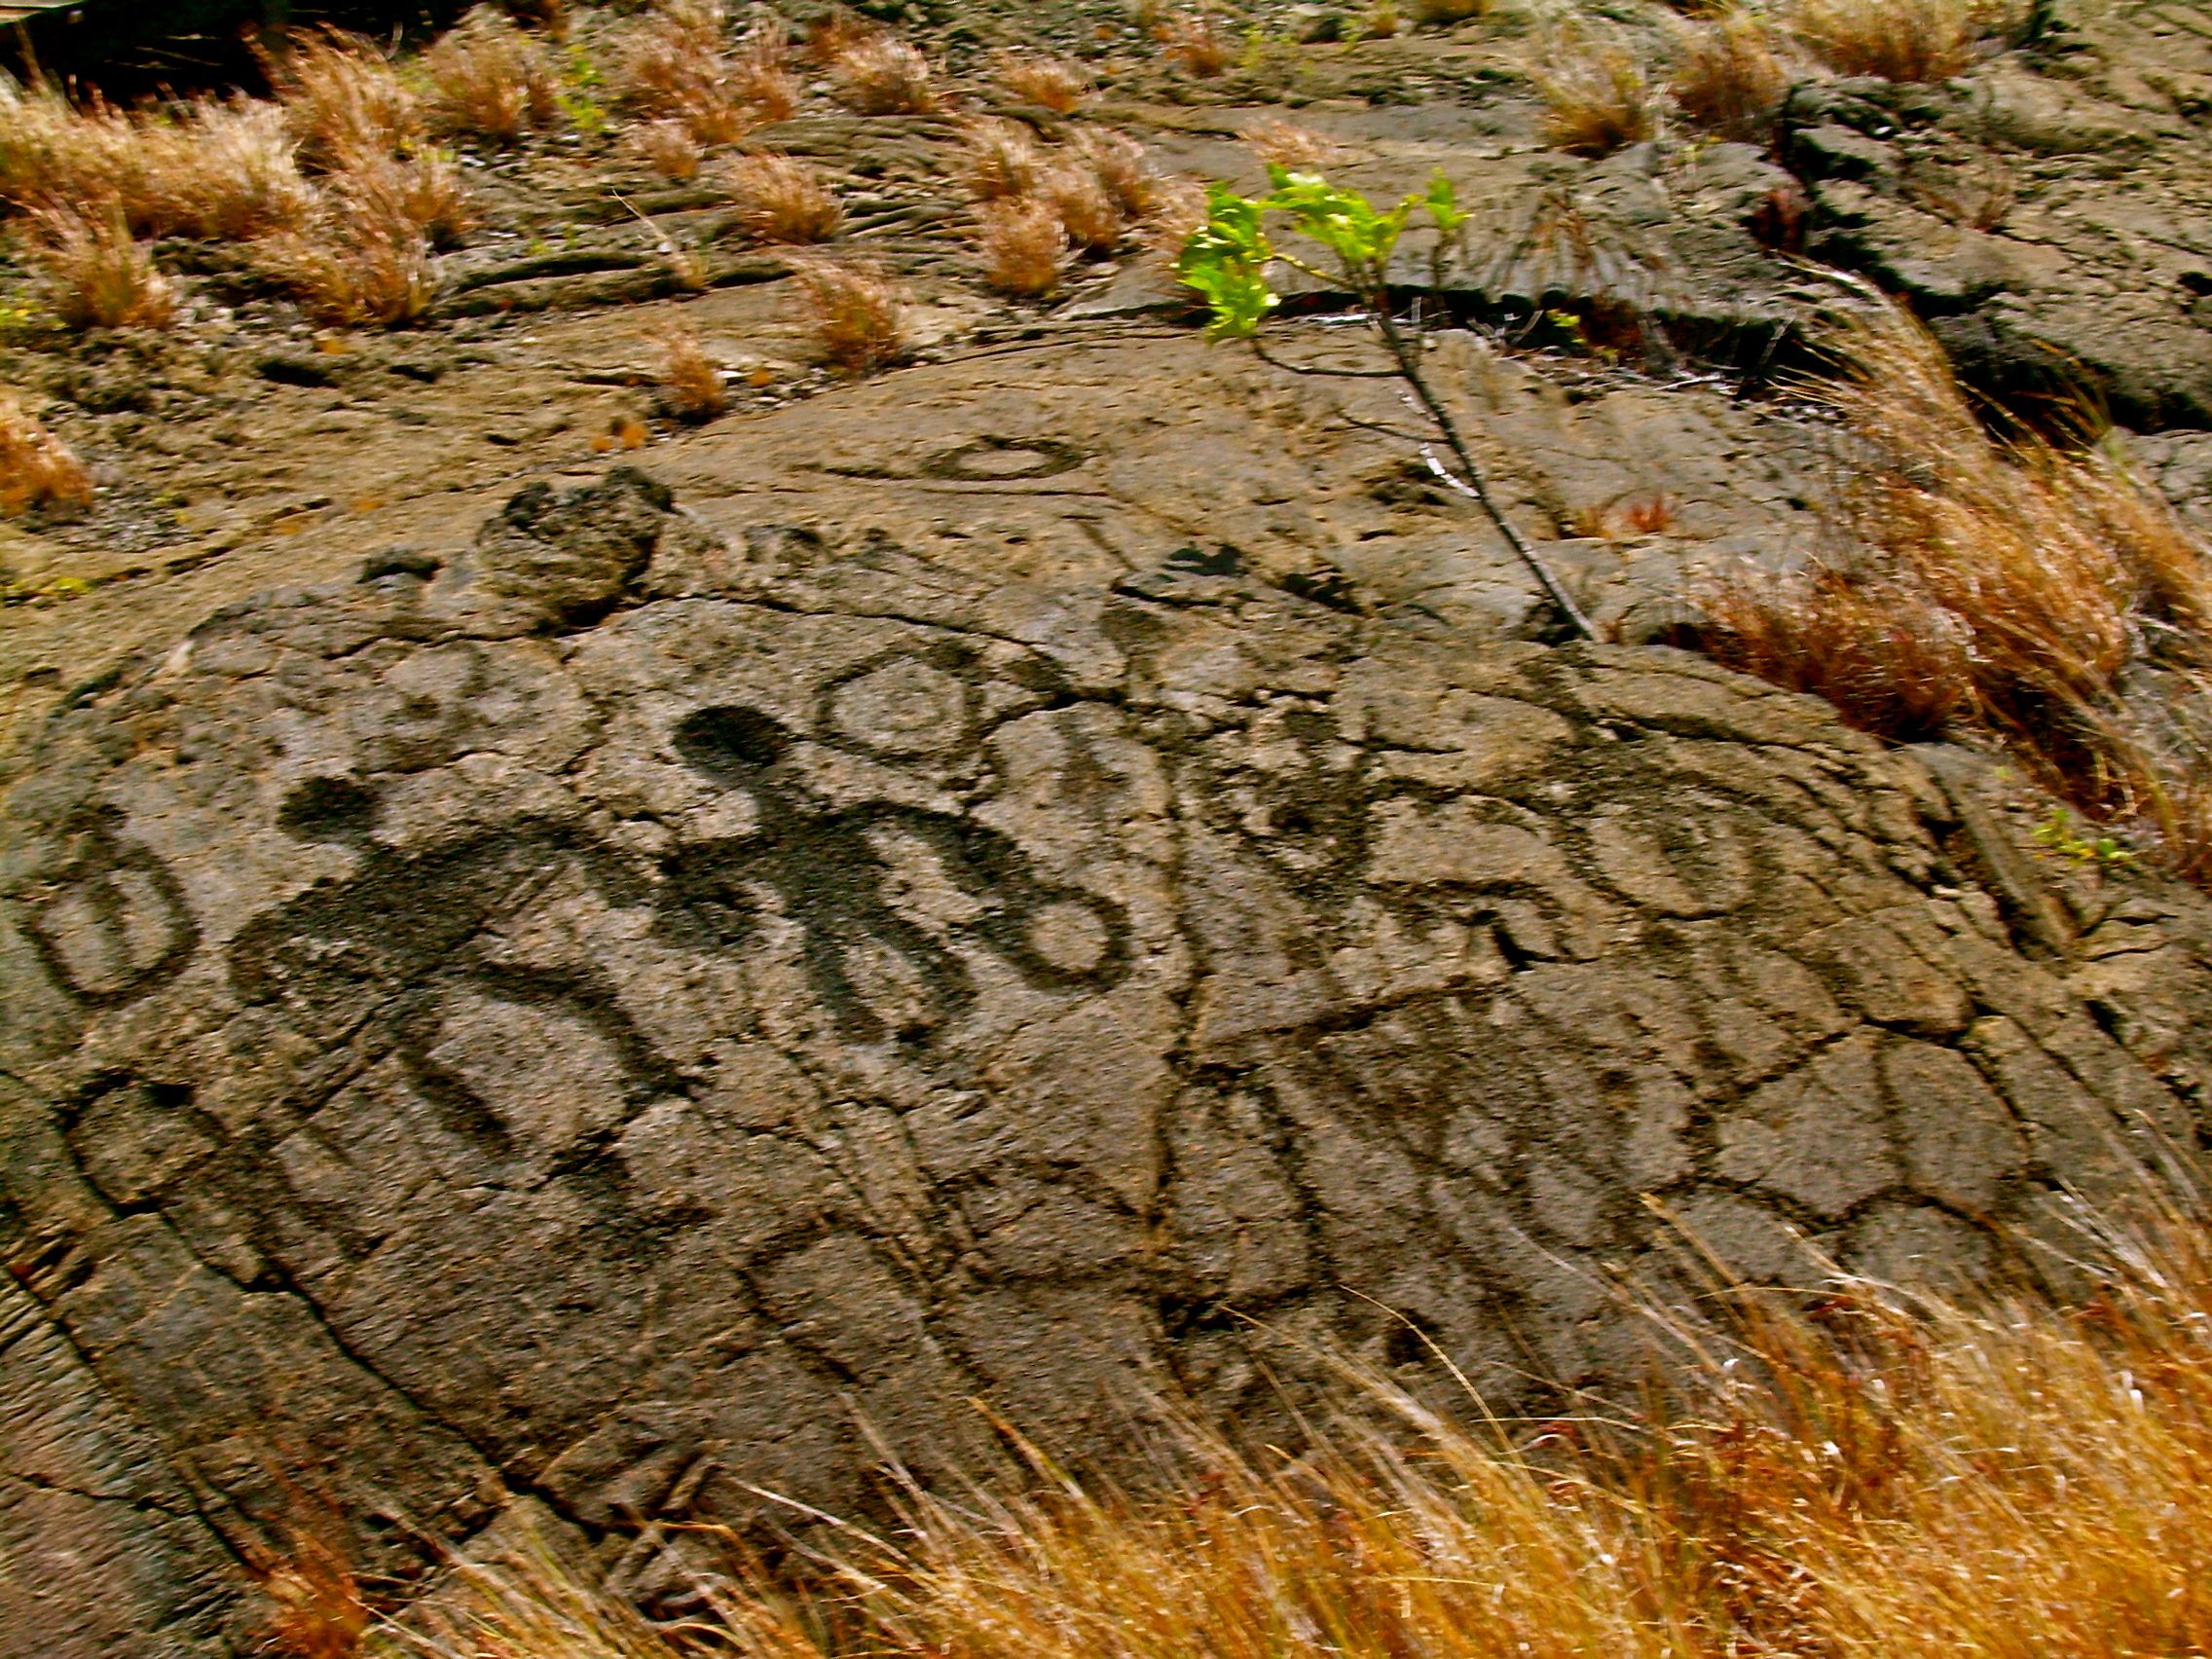 about-23000-petroglyphs-in-the-area.jpg